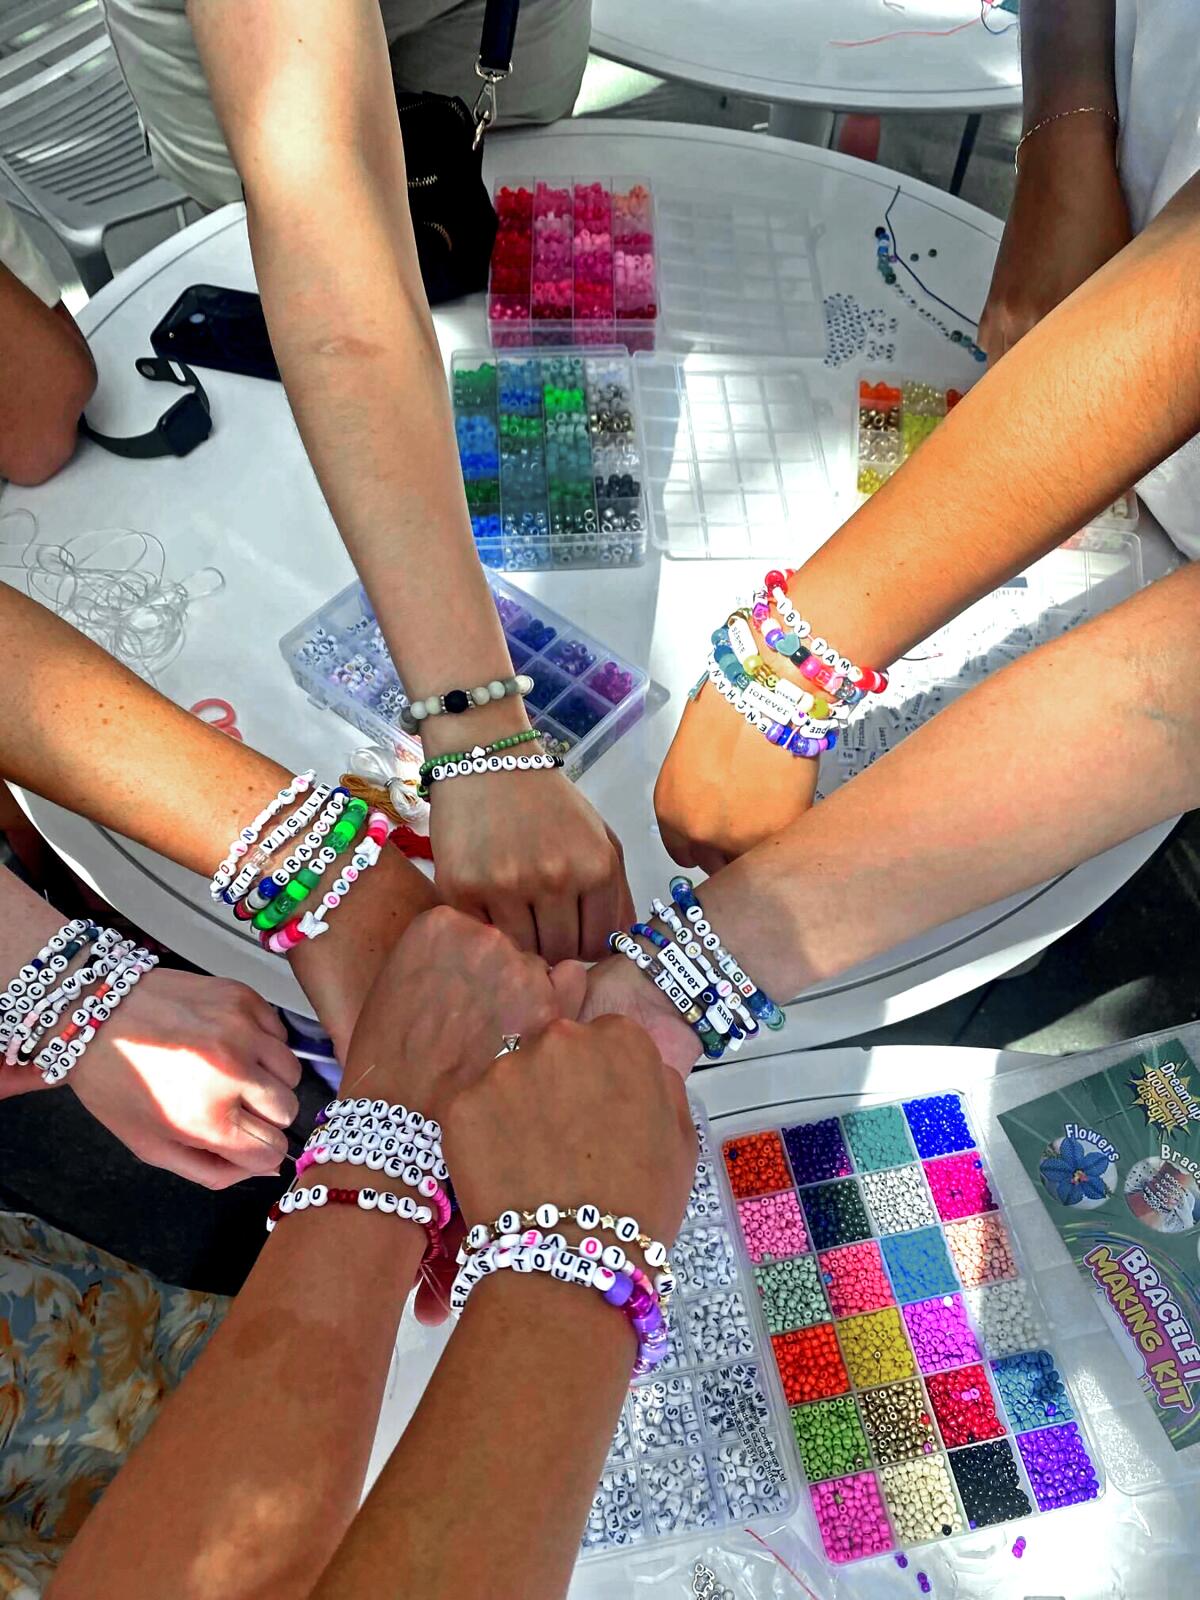 Bracelet makers' hands reach for materials on a table